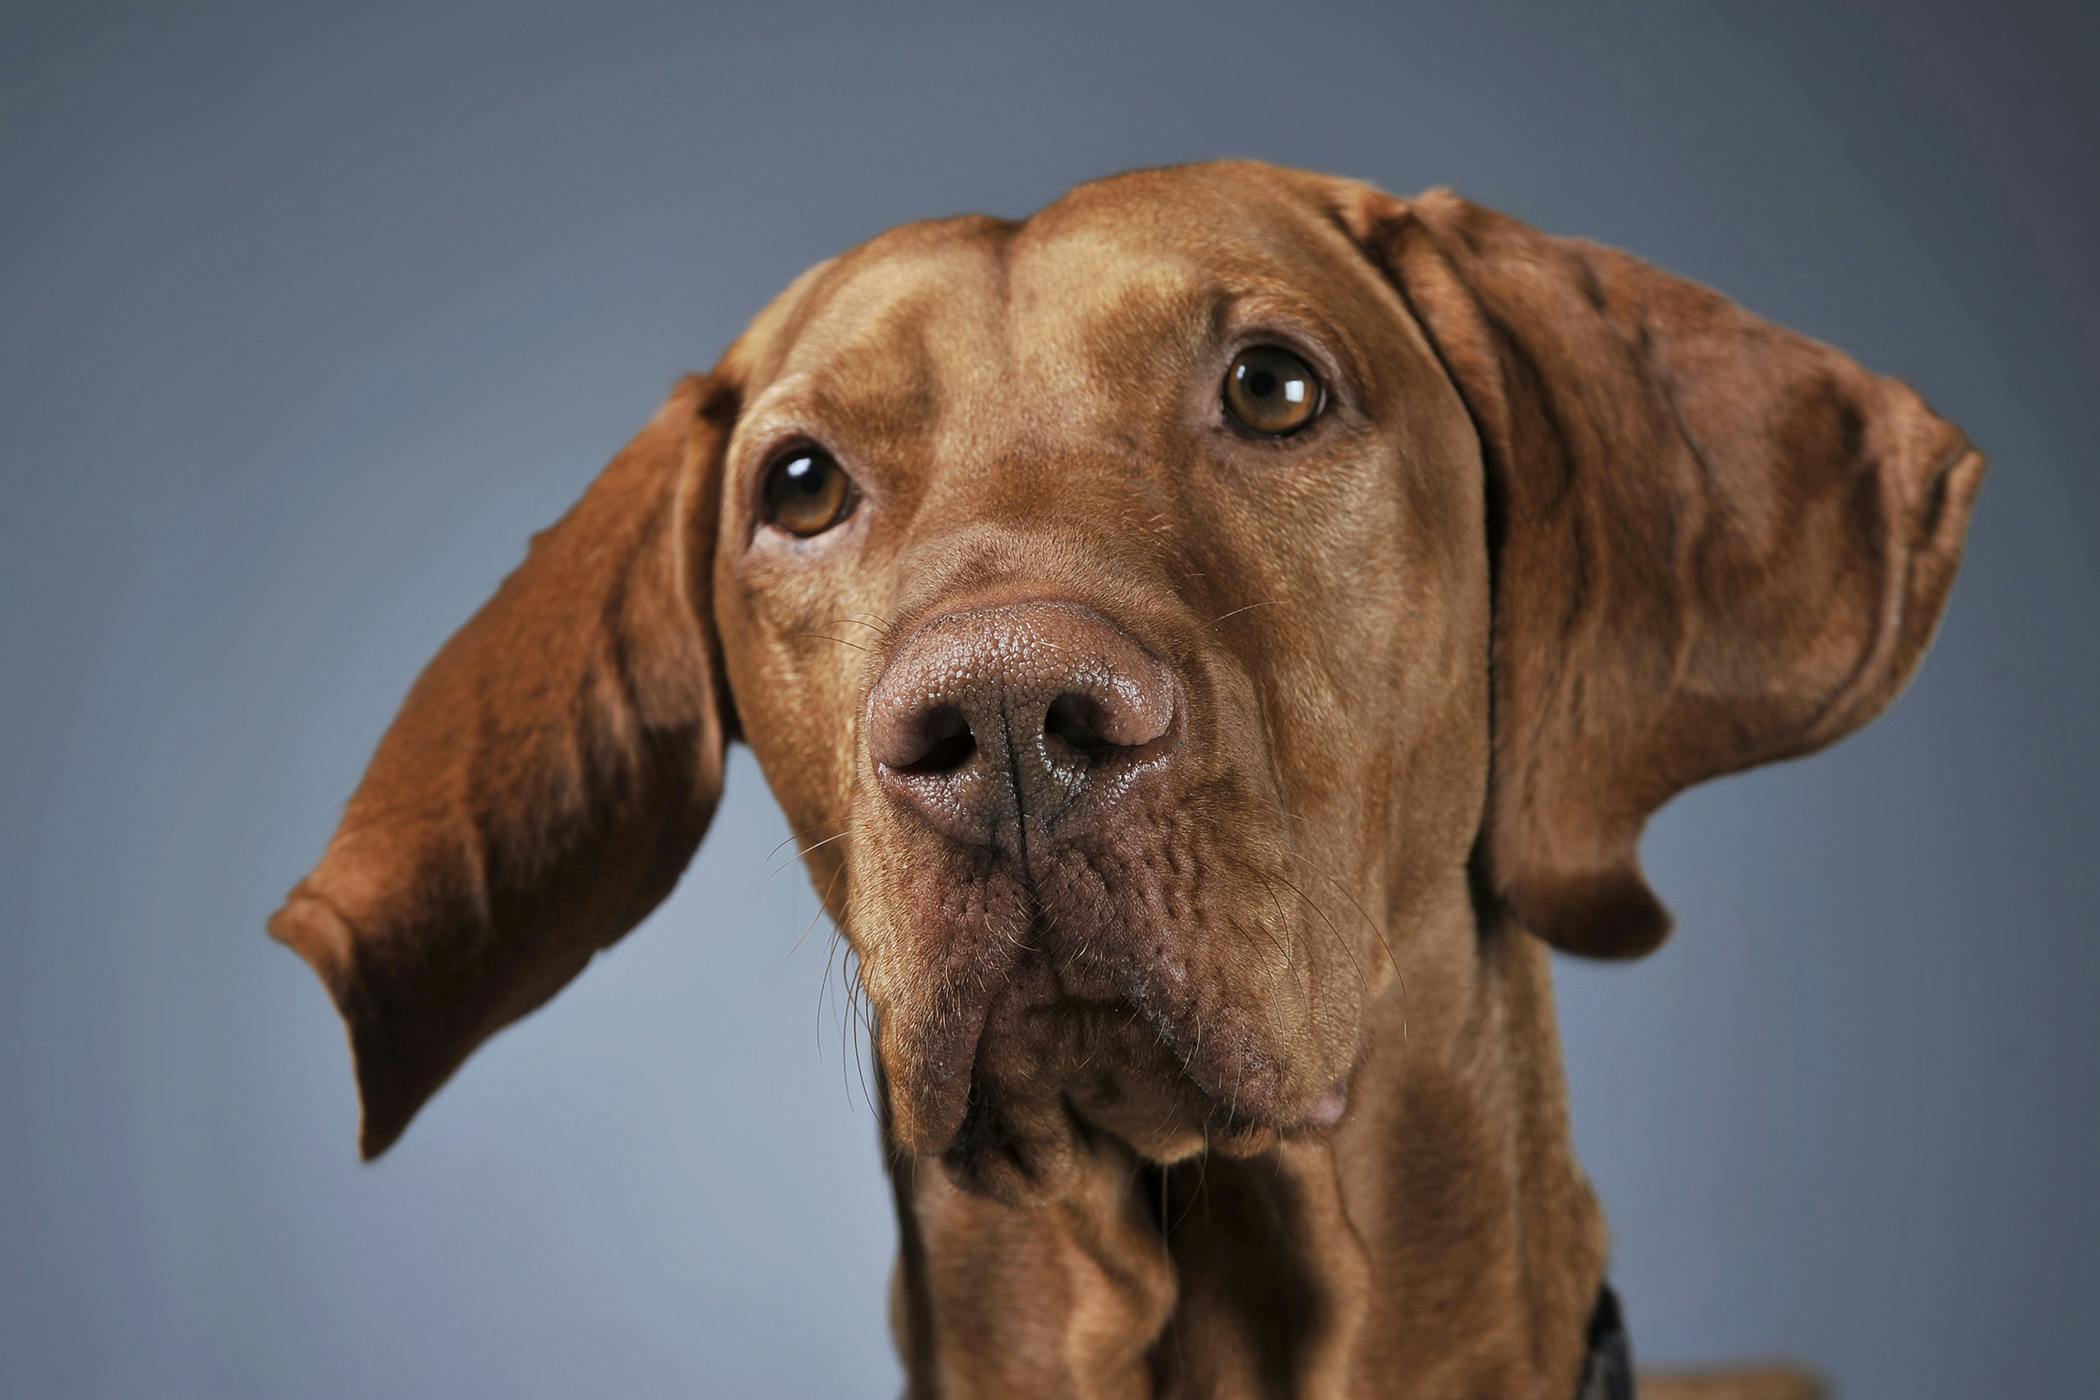 can high protein diet cause pancreatitis in dogs